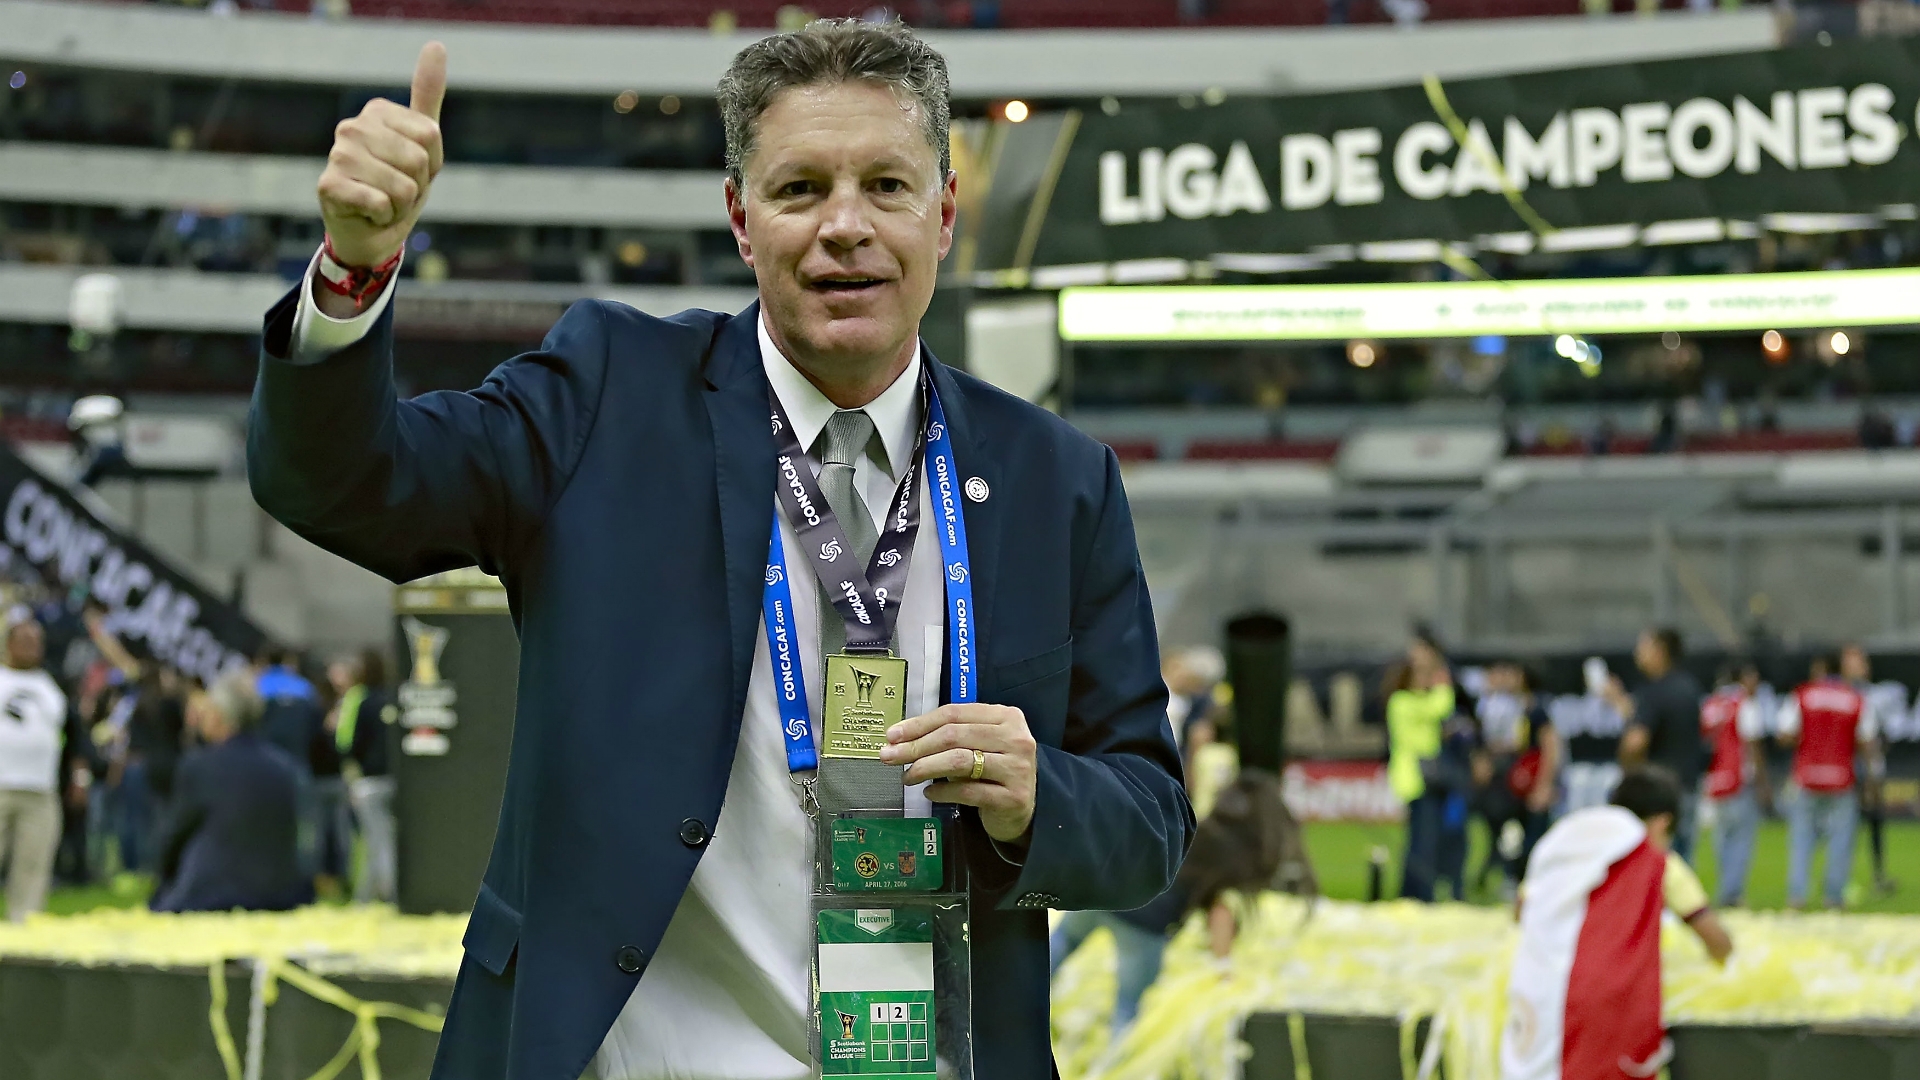 Club America sporting director Pelaez to leave after tournament   Cameroon